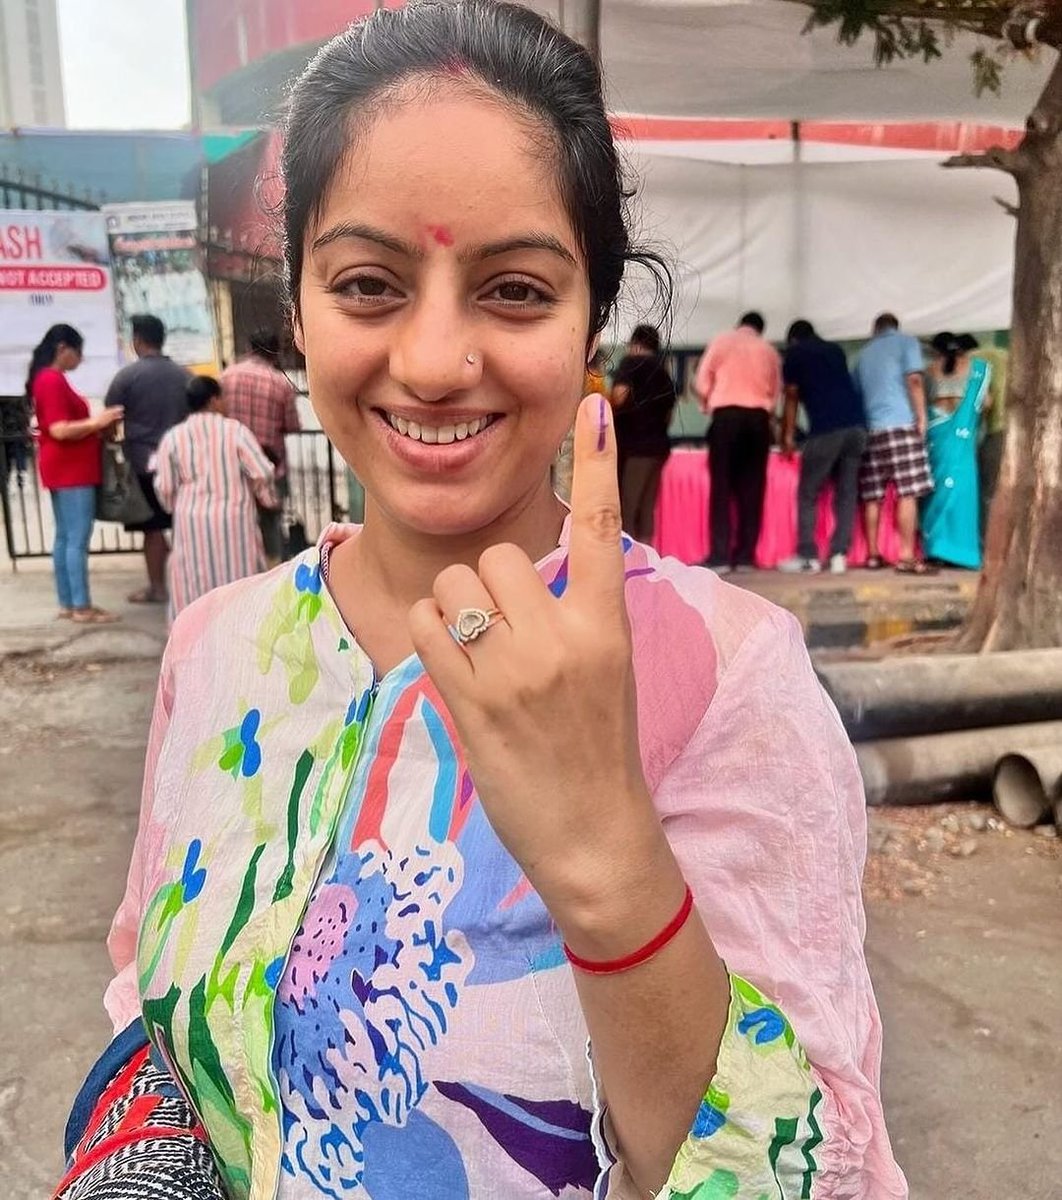 Hina Khan and Deepika Singh casts their vote! 🙌🏻
Urges citizens to take on responsibility of voting for the country!
@eyehinakhan 

#HinaKhan #DeepikaSingh #Elections